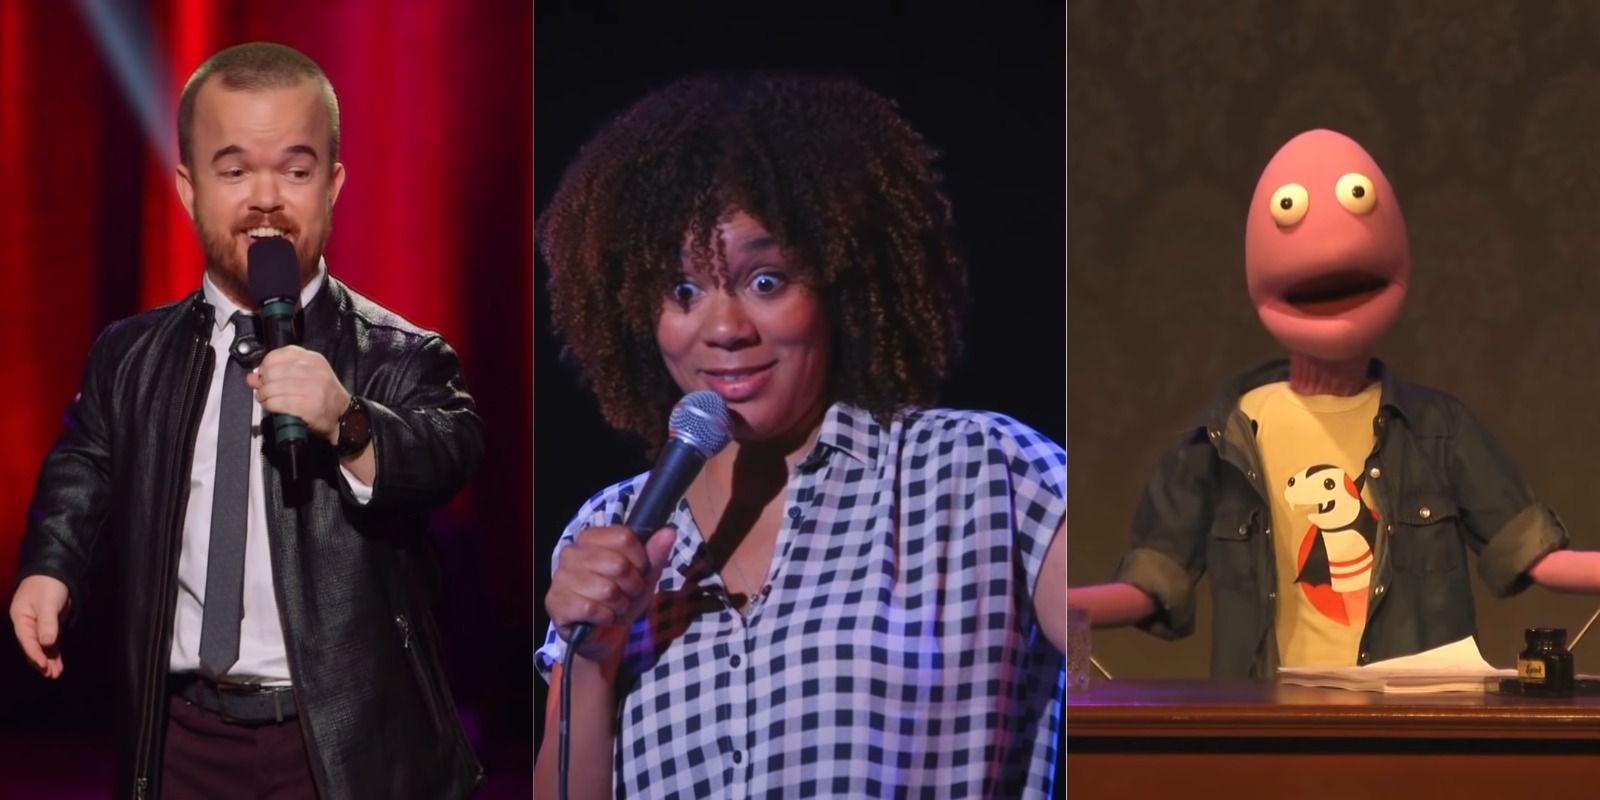 Three side by side images of comedians on YouTube.